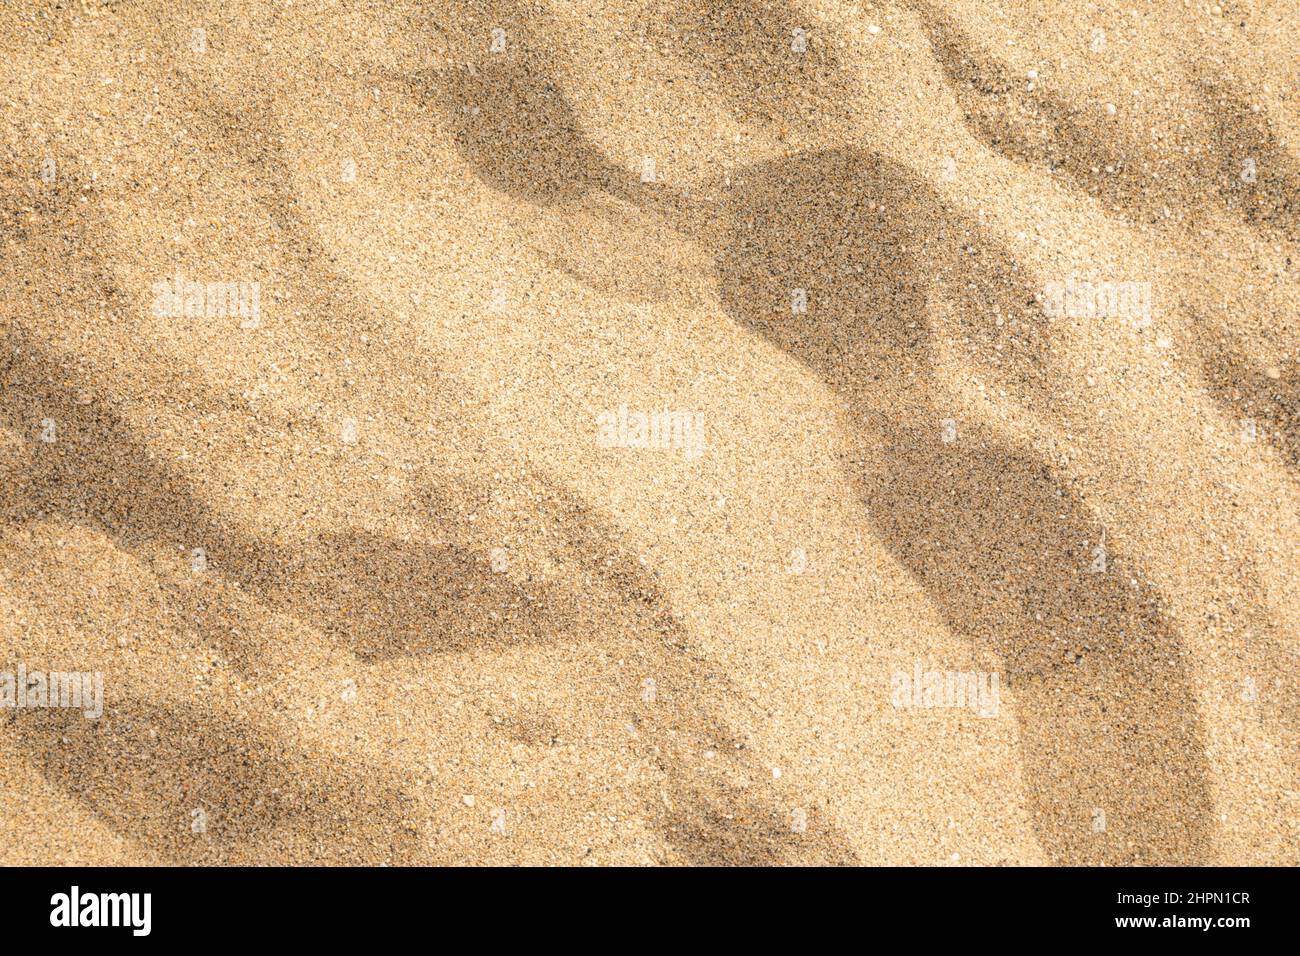 Sand on the beach background Stock Photo